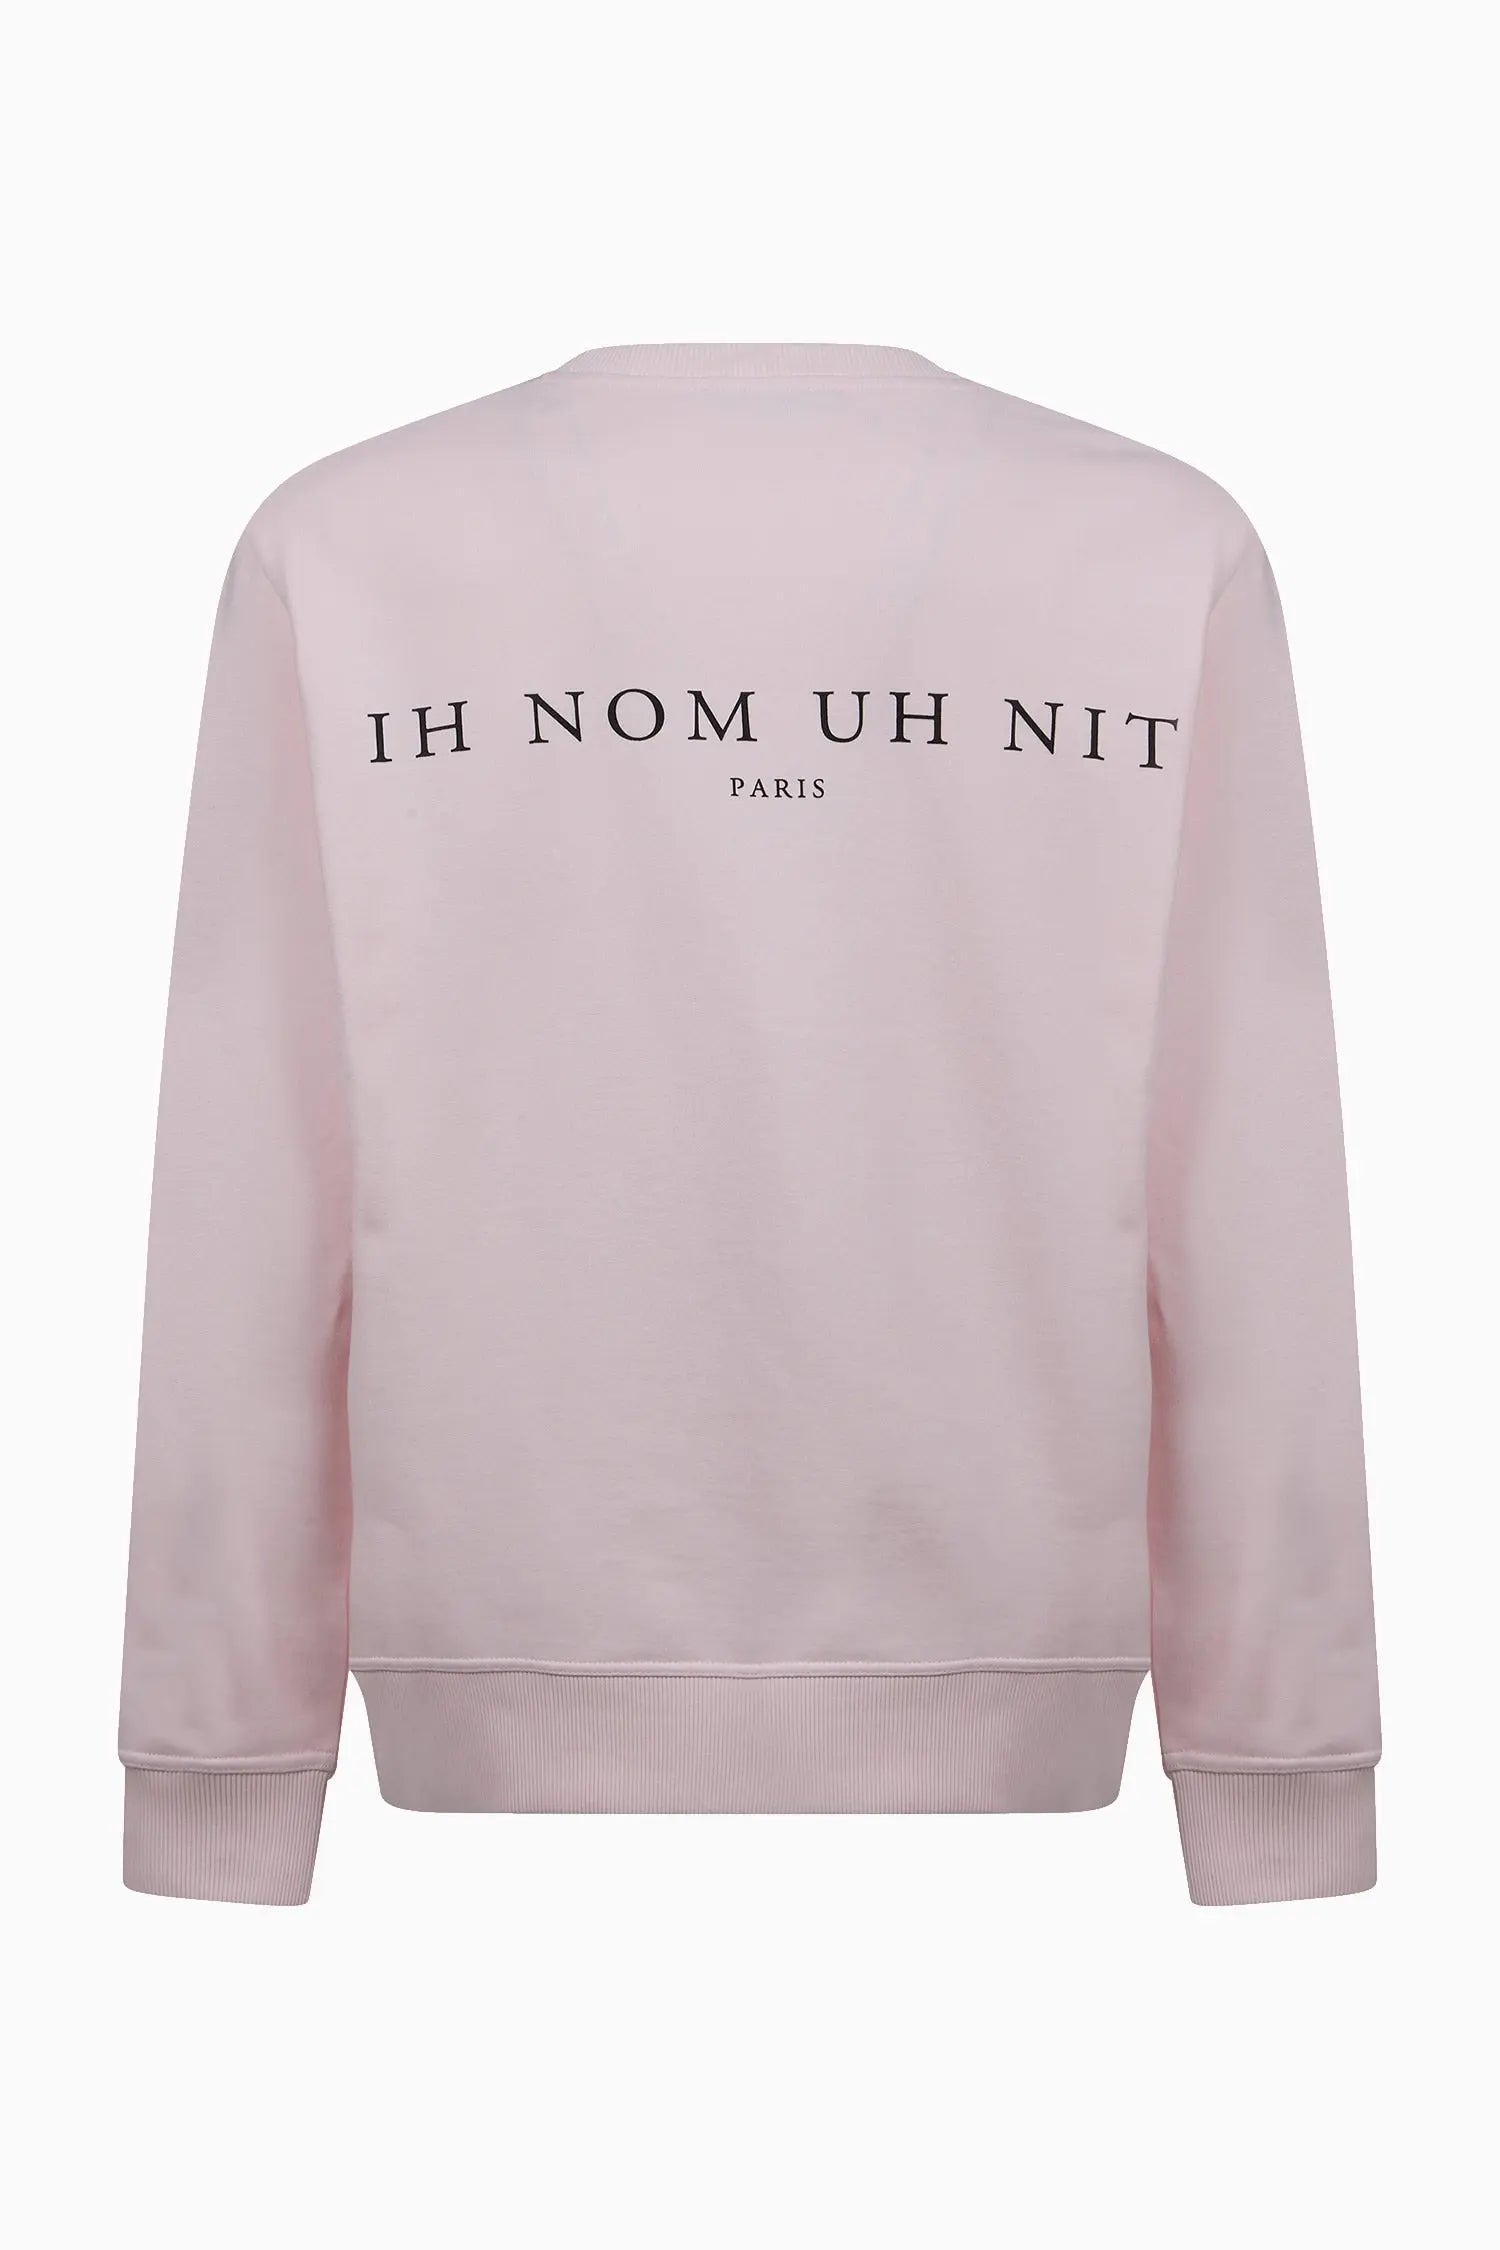 CREWNECK WITH MASK AND ROSES - IH NOM UH NIT